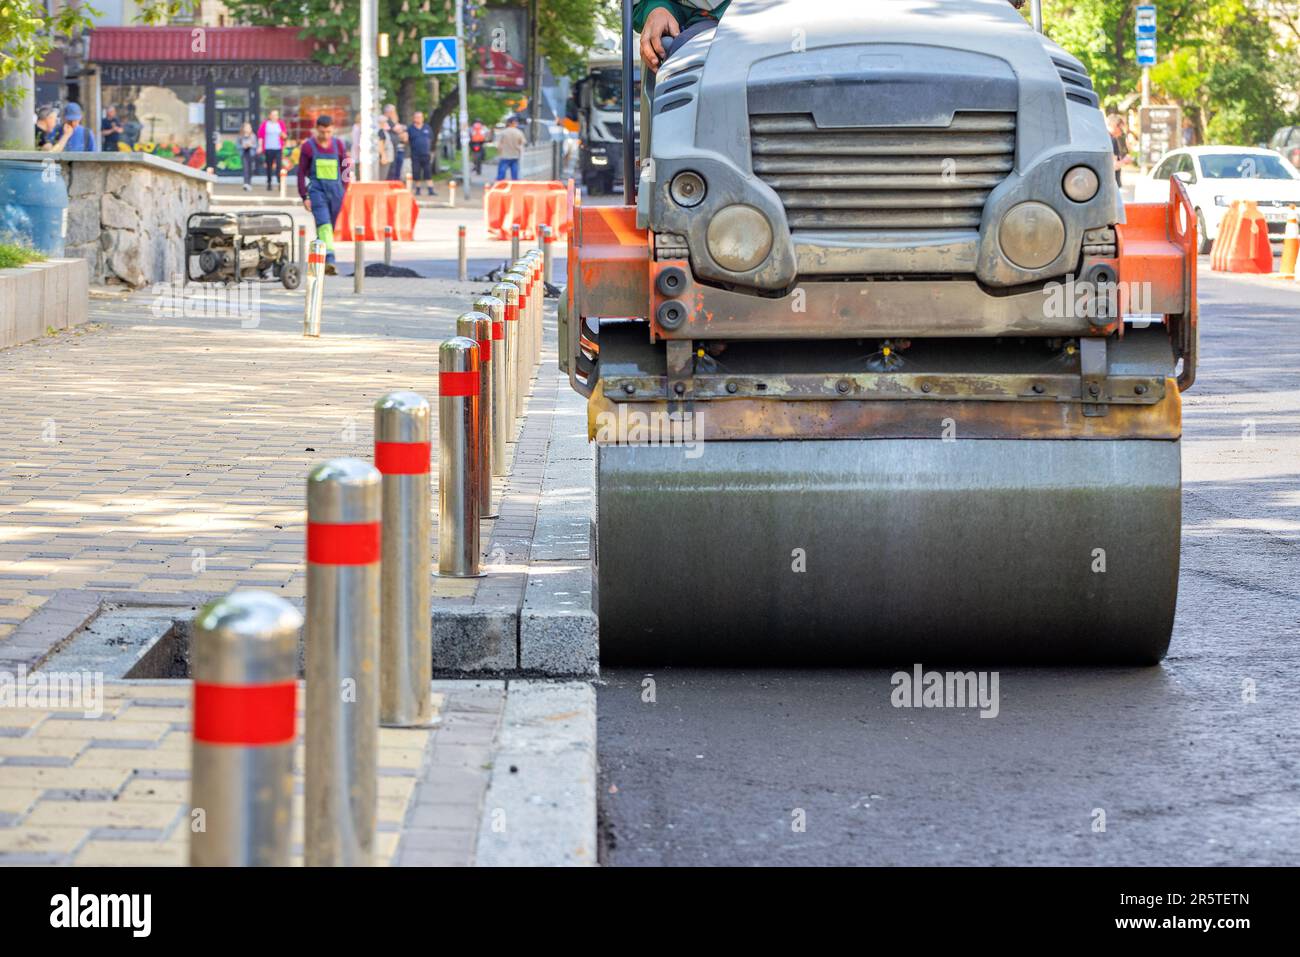 A vibrating roller compacts and compacts fresh asphalt on a city street on a sunny day on a roadway along a paved sidewalk. Close-up. Copy space. Stock Photo